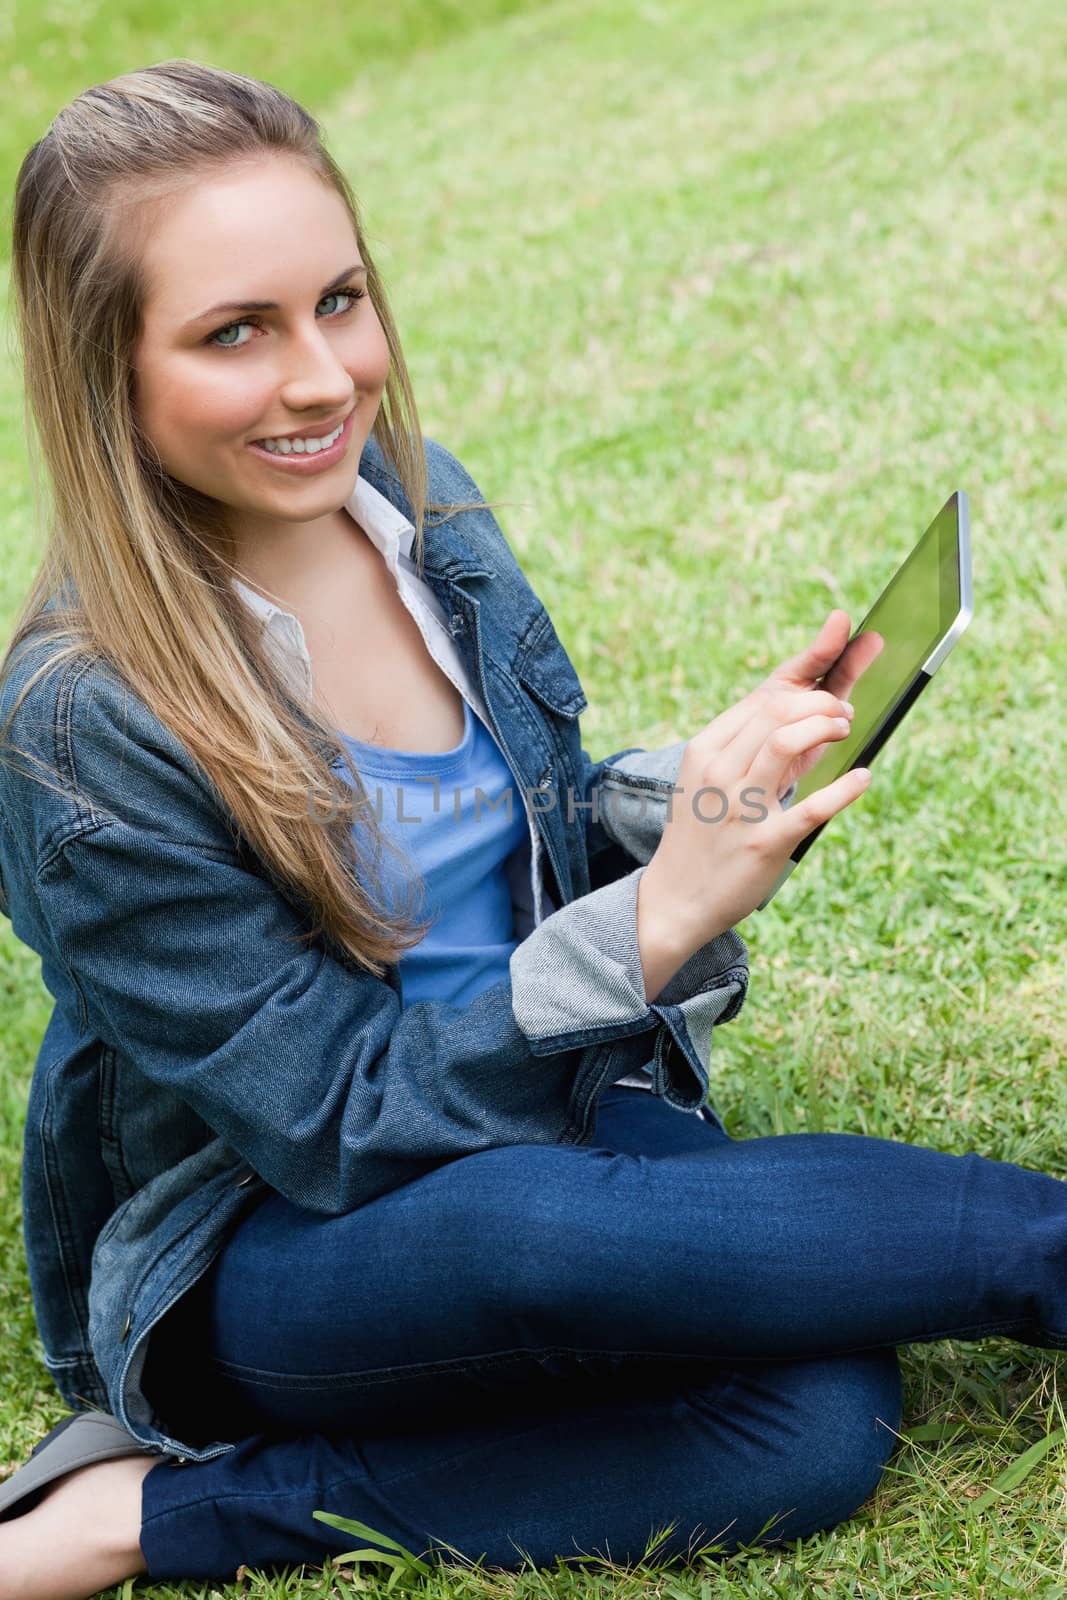 Young happy girl looking at the camera while touching her tablet pc in a parkland